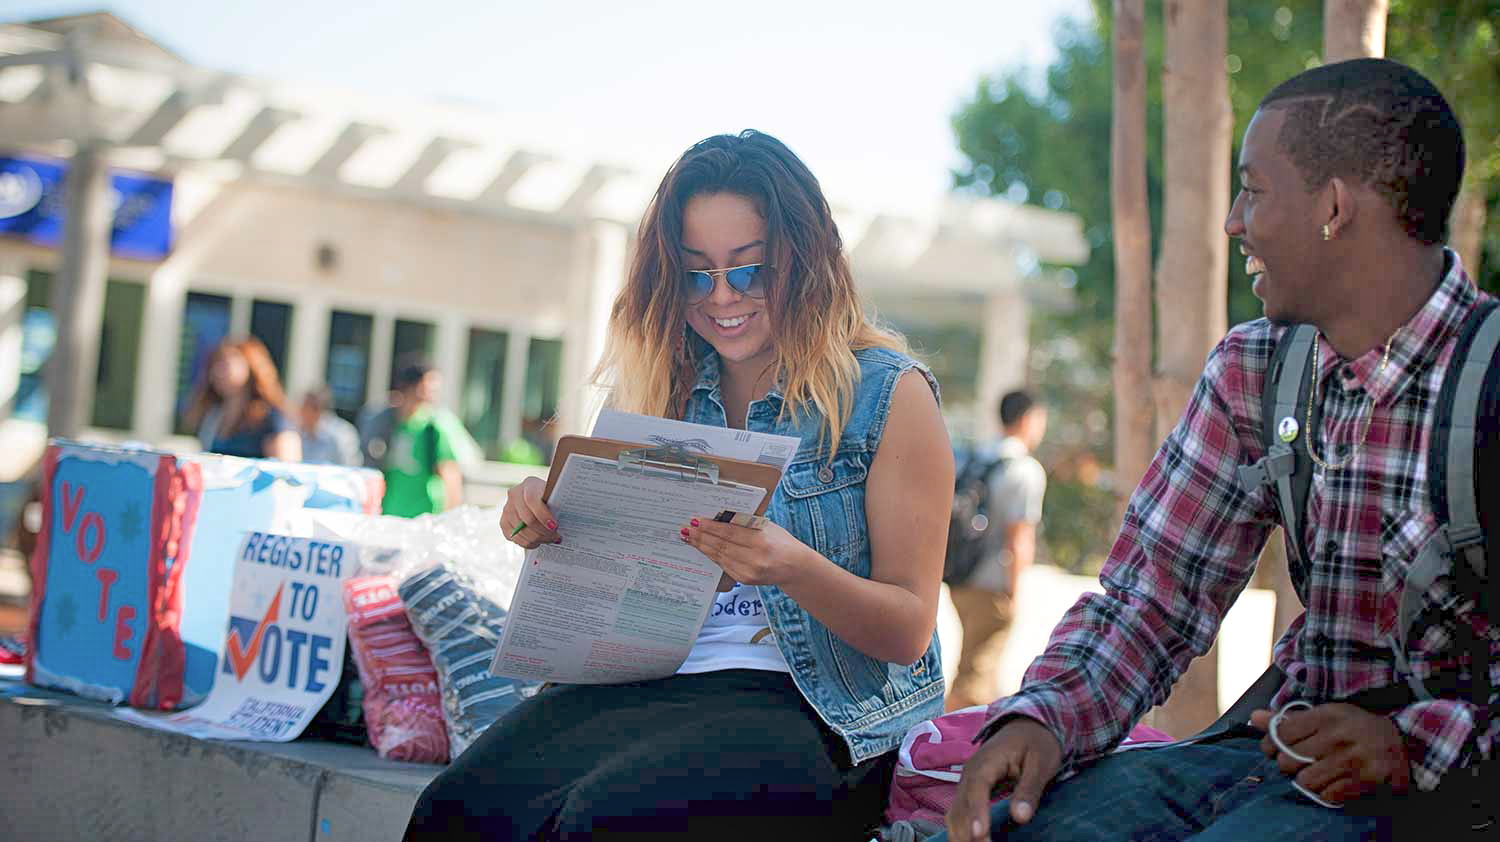 UC San Diego’s non-partisan Student Organized Voter Access Committee is working to register 4,000 students by the Oct. 24 California deadline. (Photos by Erik Jepsen/UC San Diego Publications)